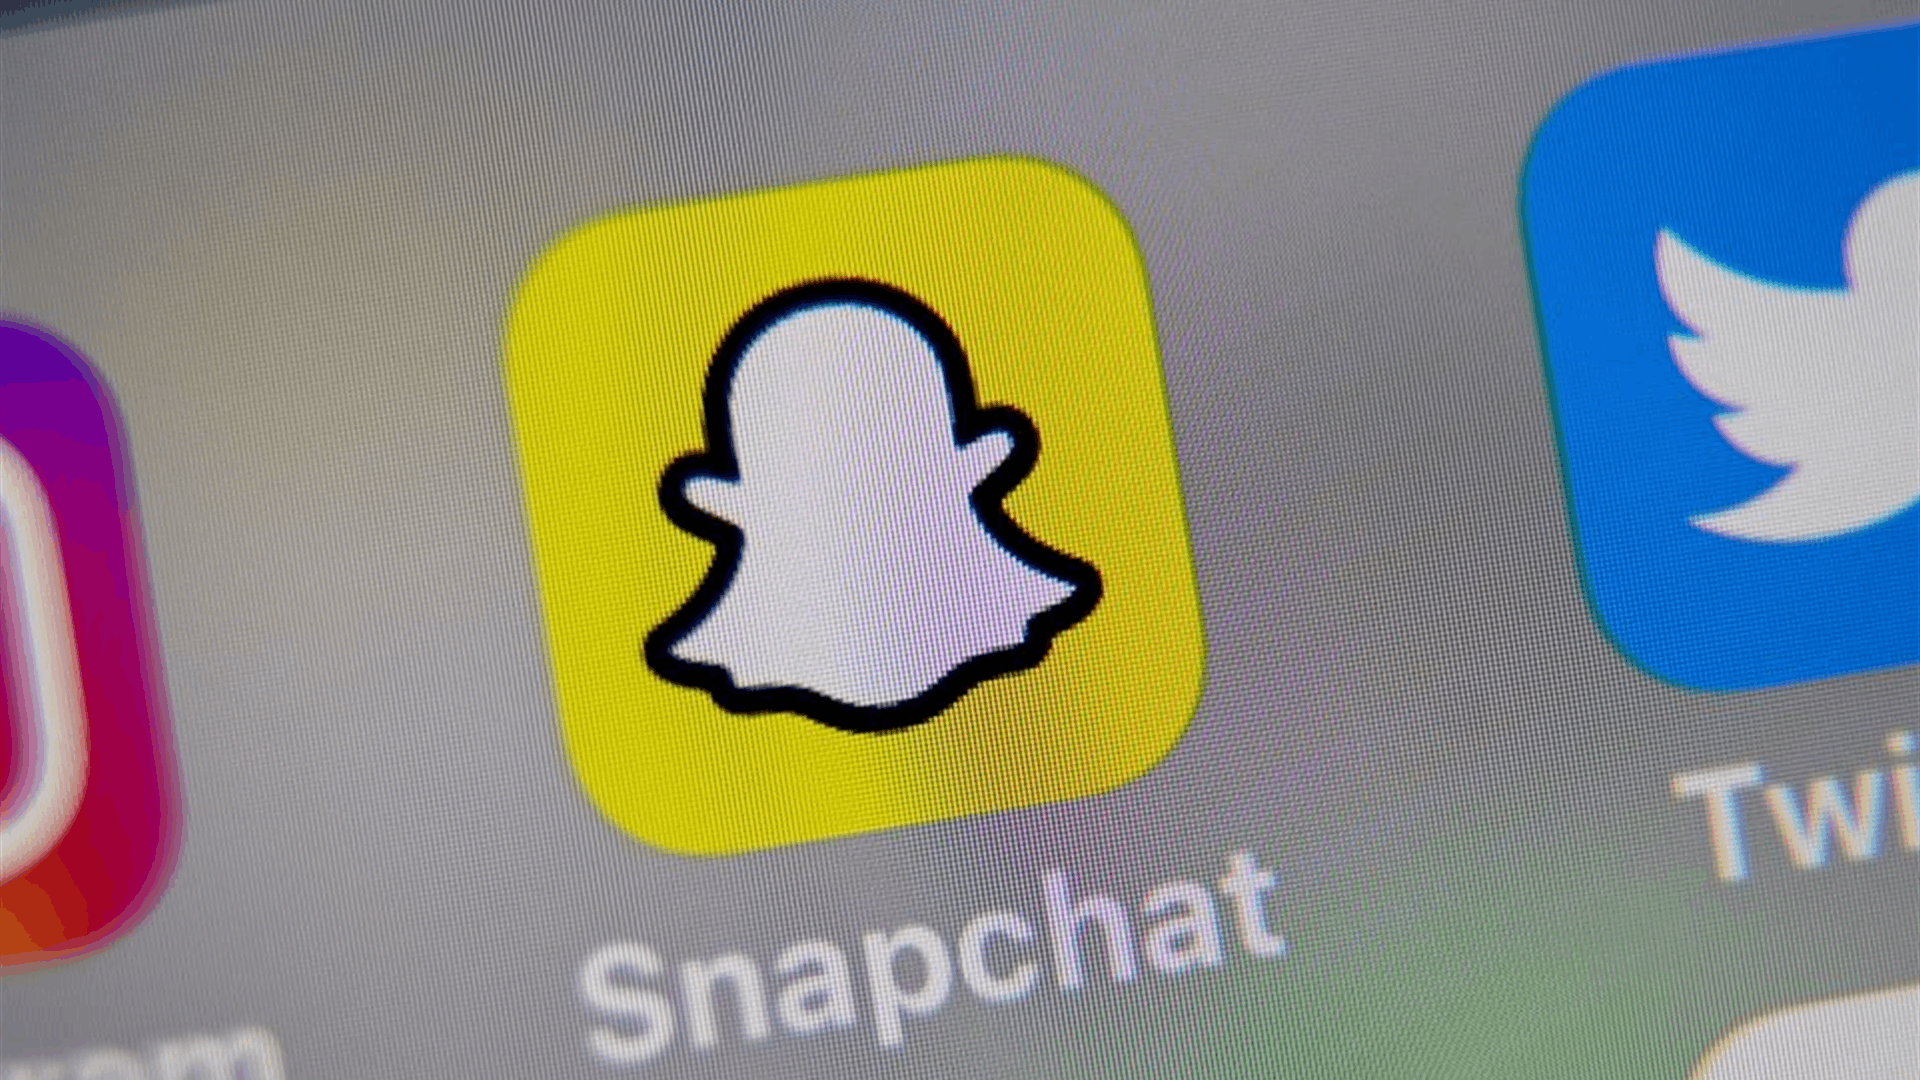 Snap is teaming up with Linktree to let users include links in their profiles